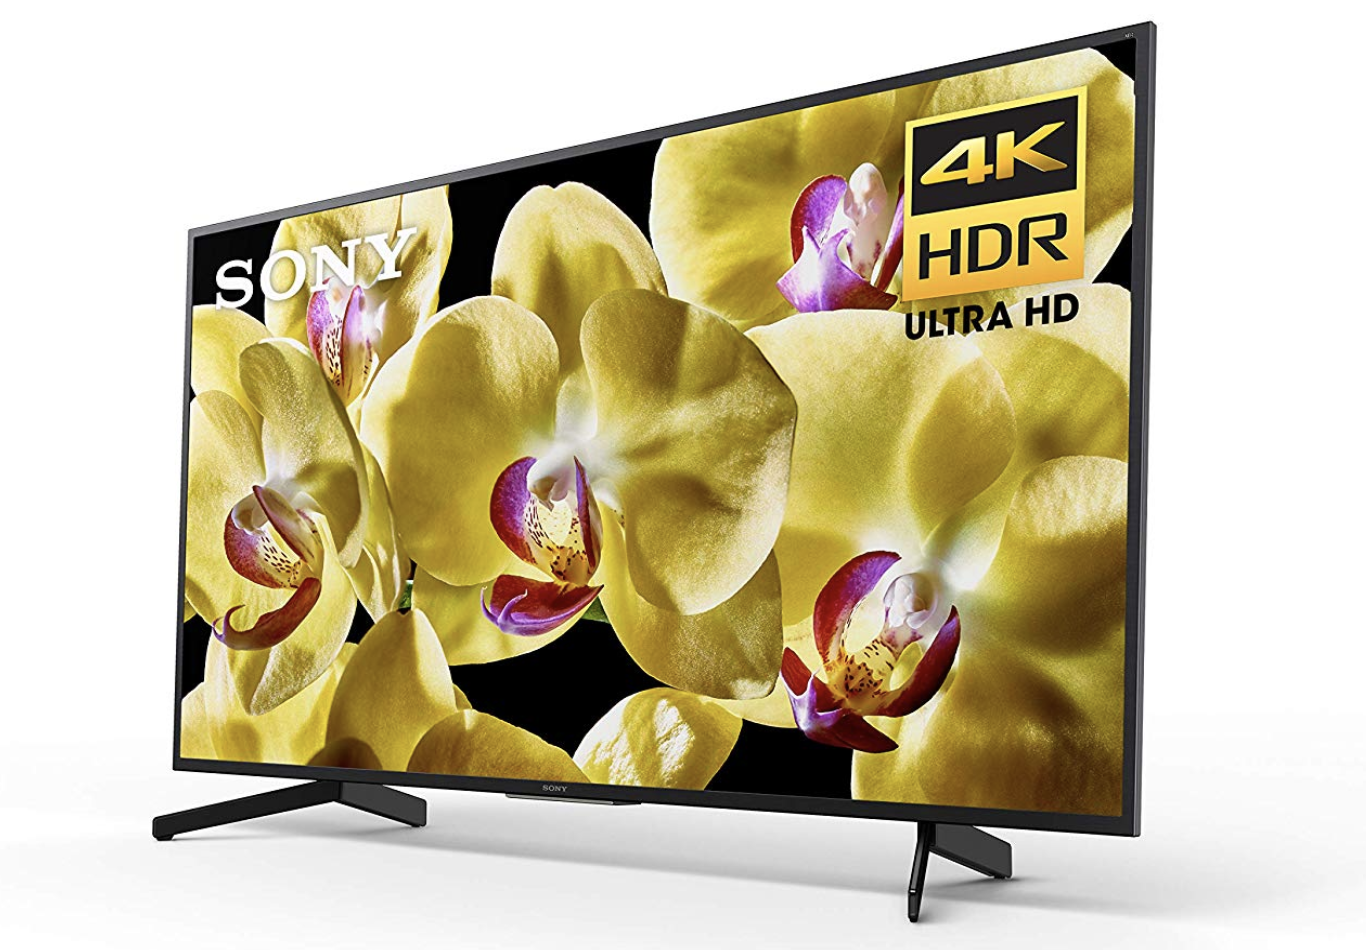 Sony X800G 55-inch TV: 4K Ultra HD Smart LED TV With HDR and Alexa Compatibility - 2019 Model